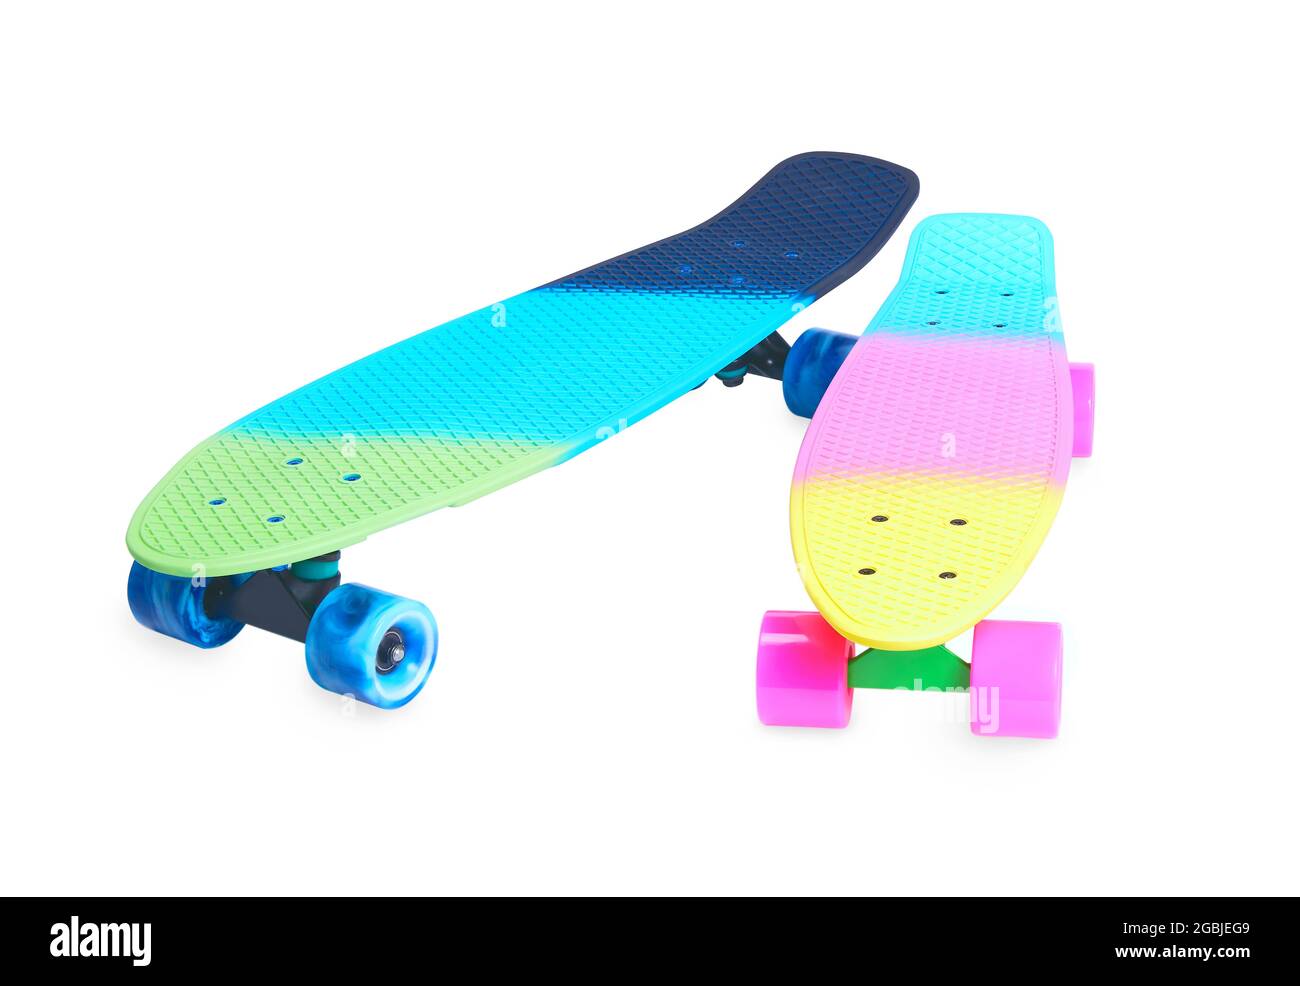 Two rainbow plastic Penny board skateboards on white background Stock Photo  - Alamy